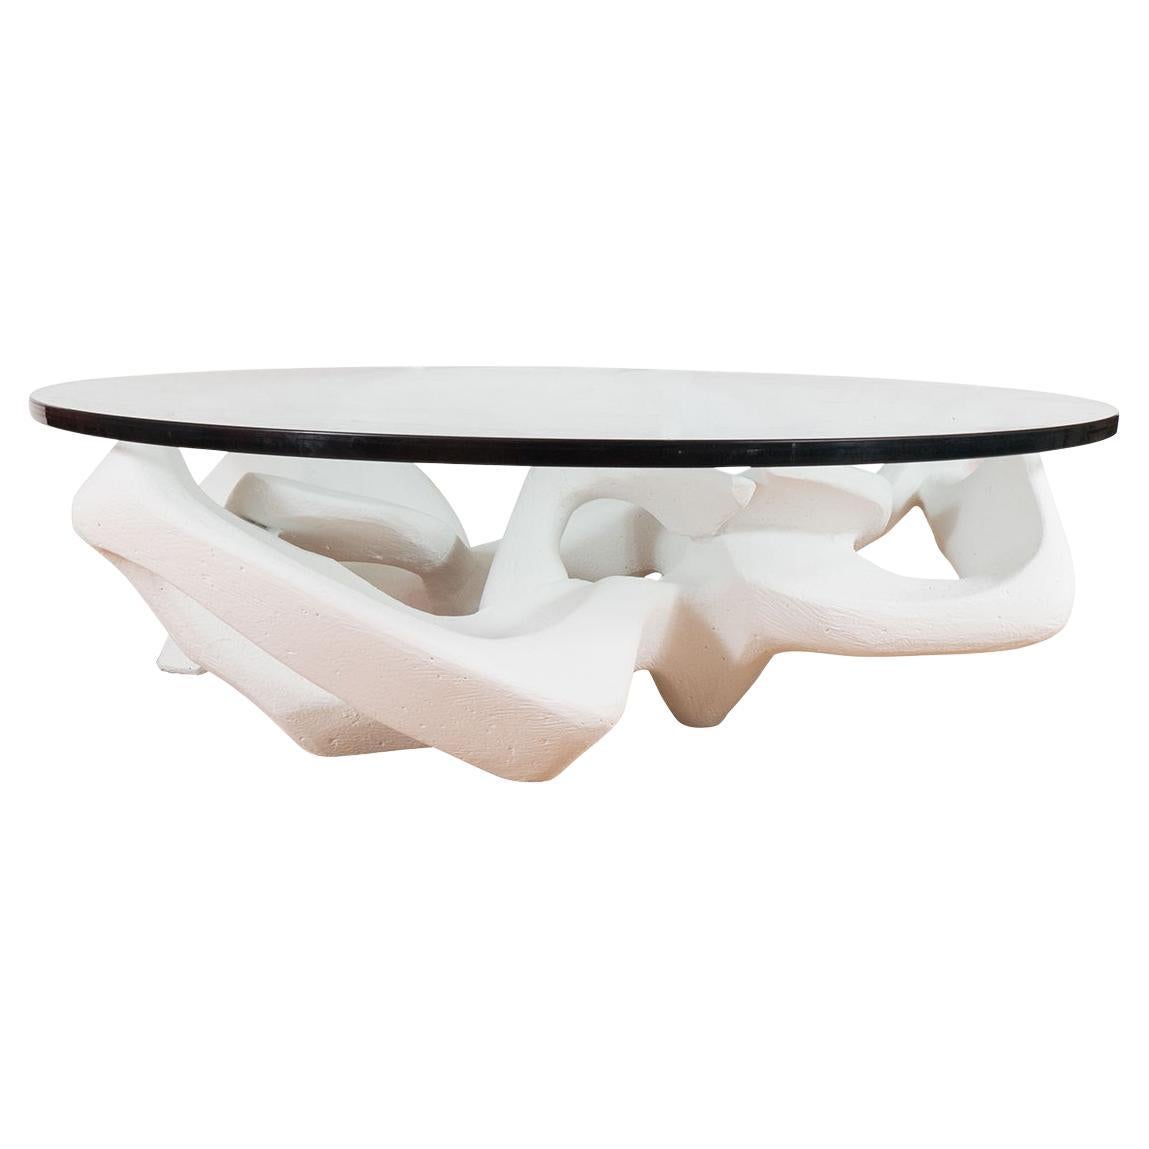 Circular coffee table with white composite base